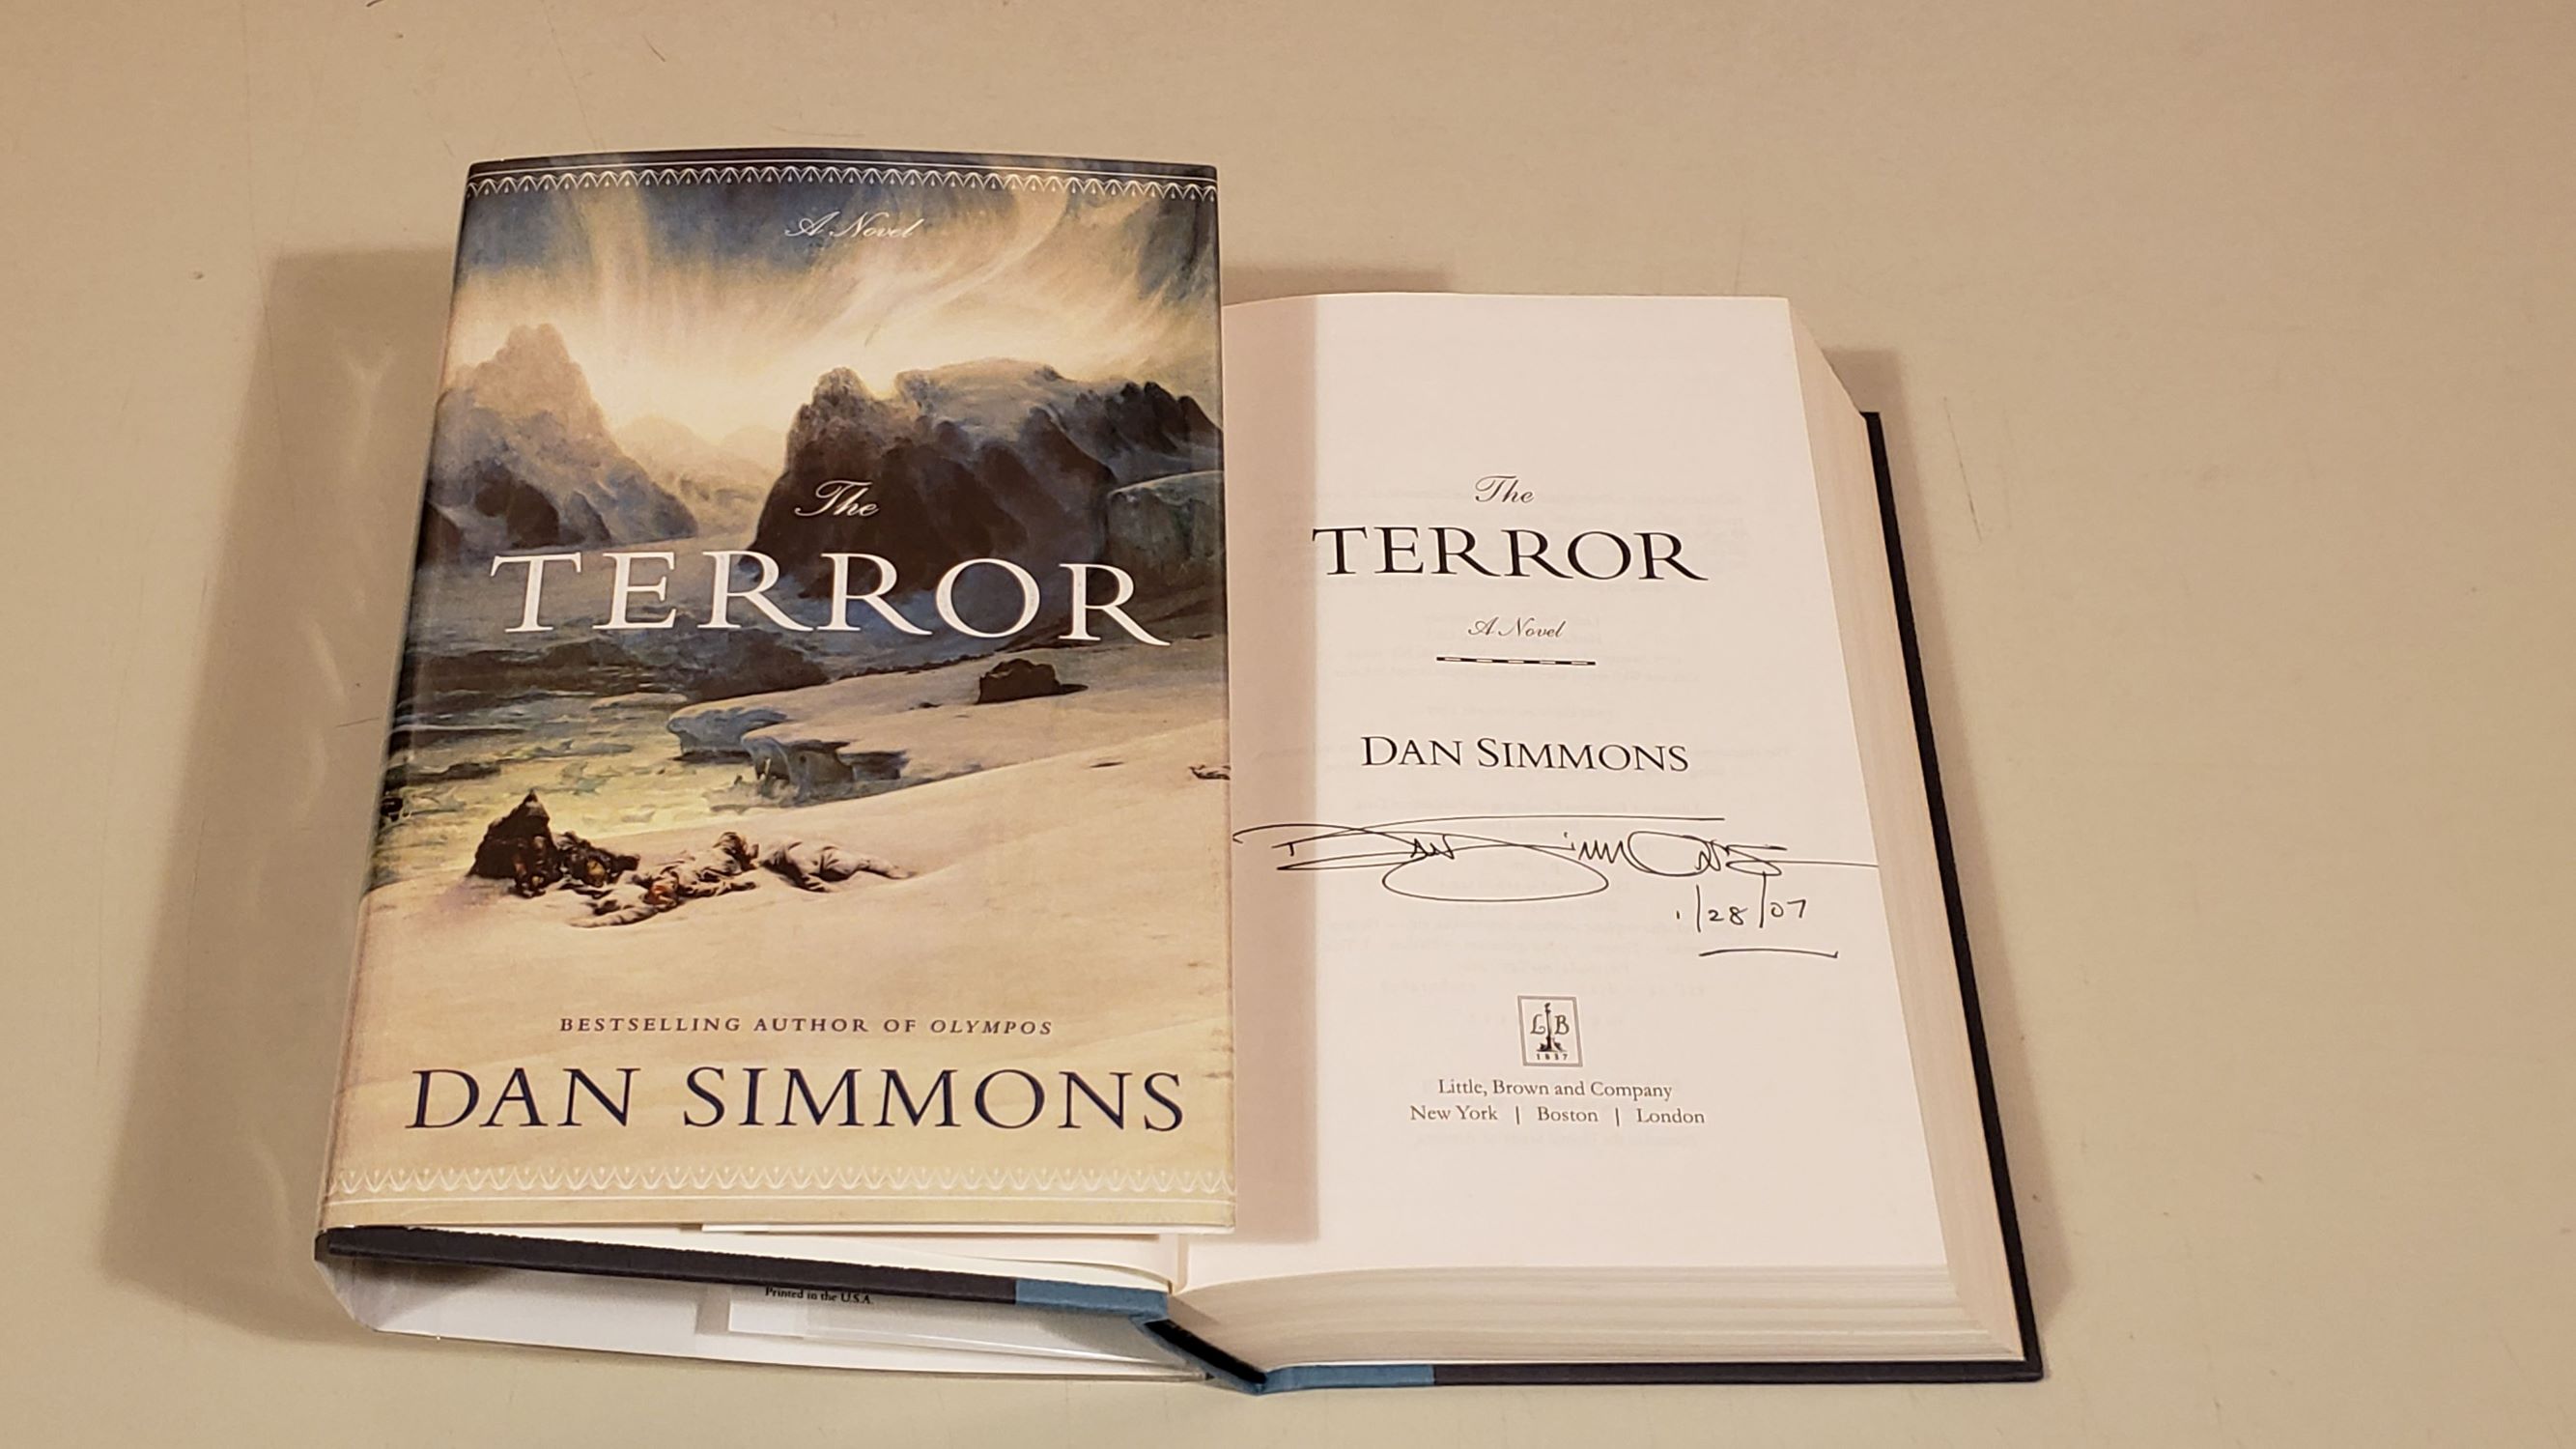 18-astounding-facts-about-the-terror-dan-simmons